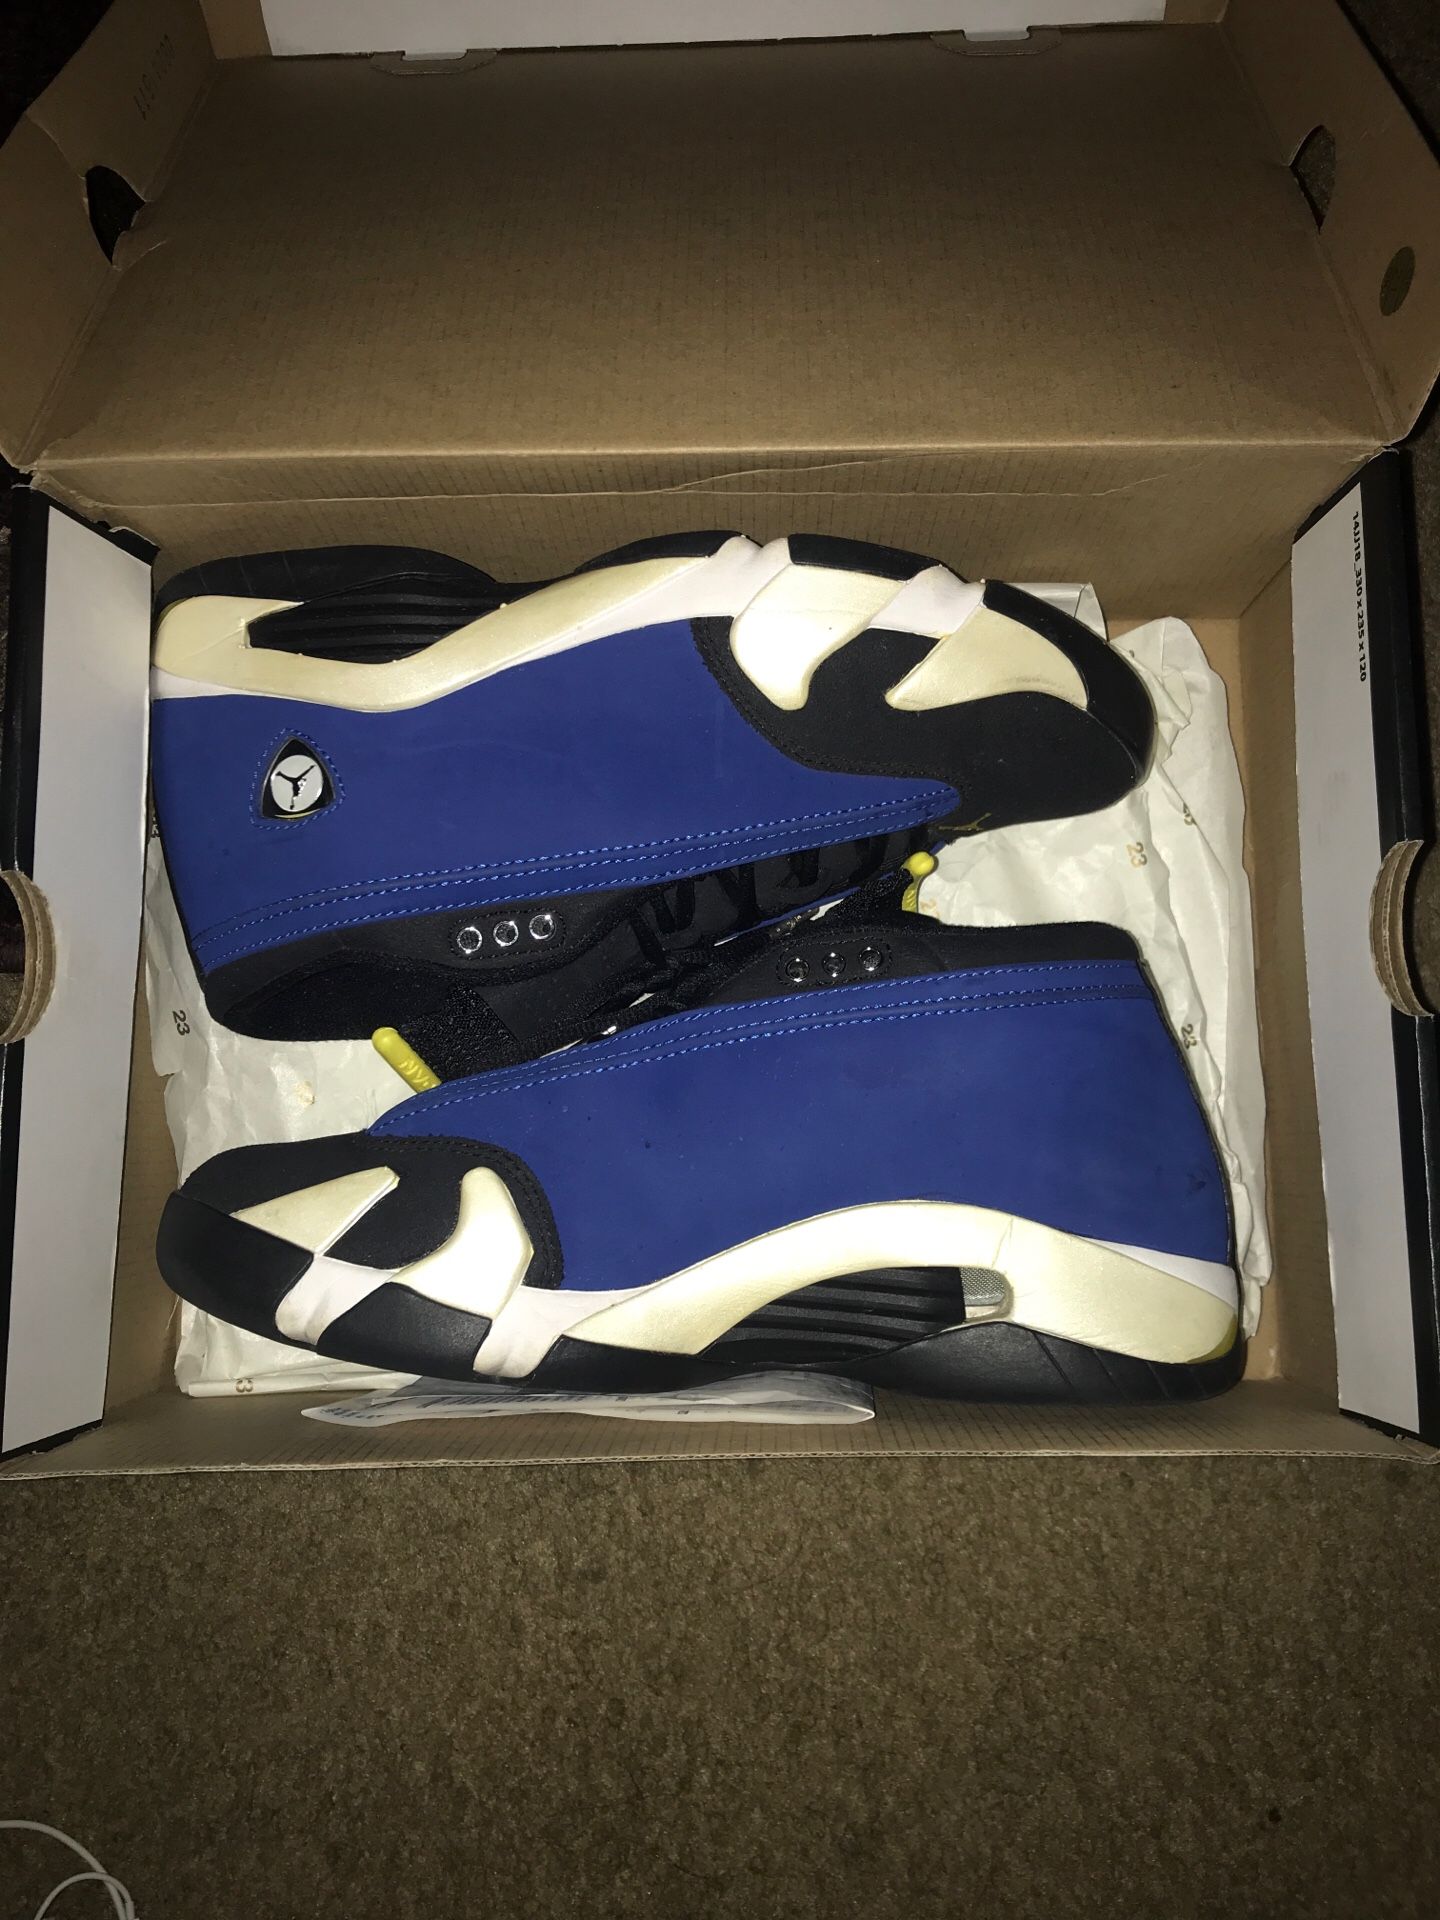 Air Jordan 14 laney size 8.5 must come to me